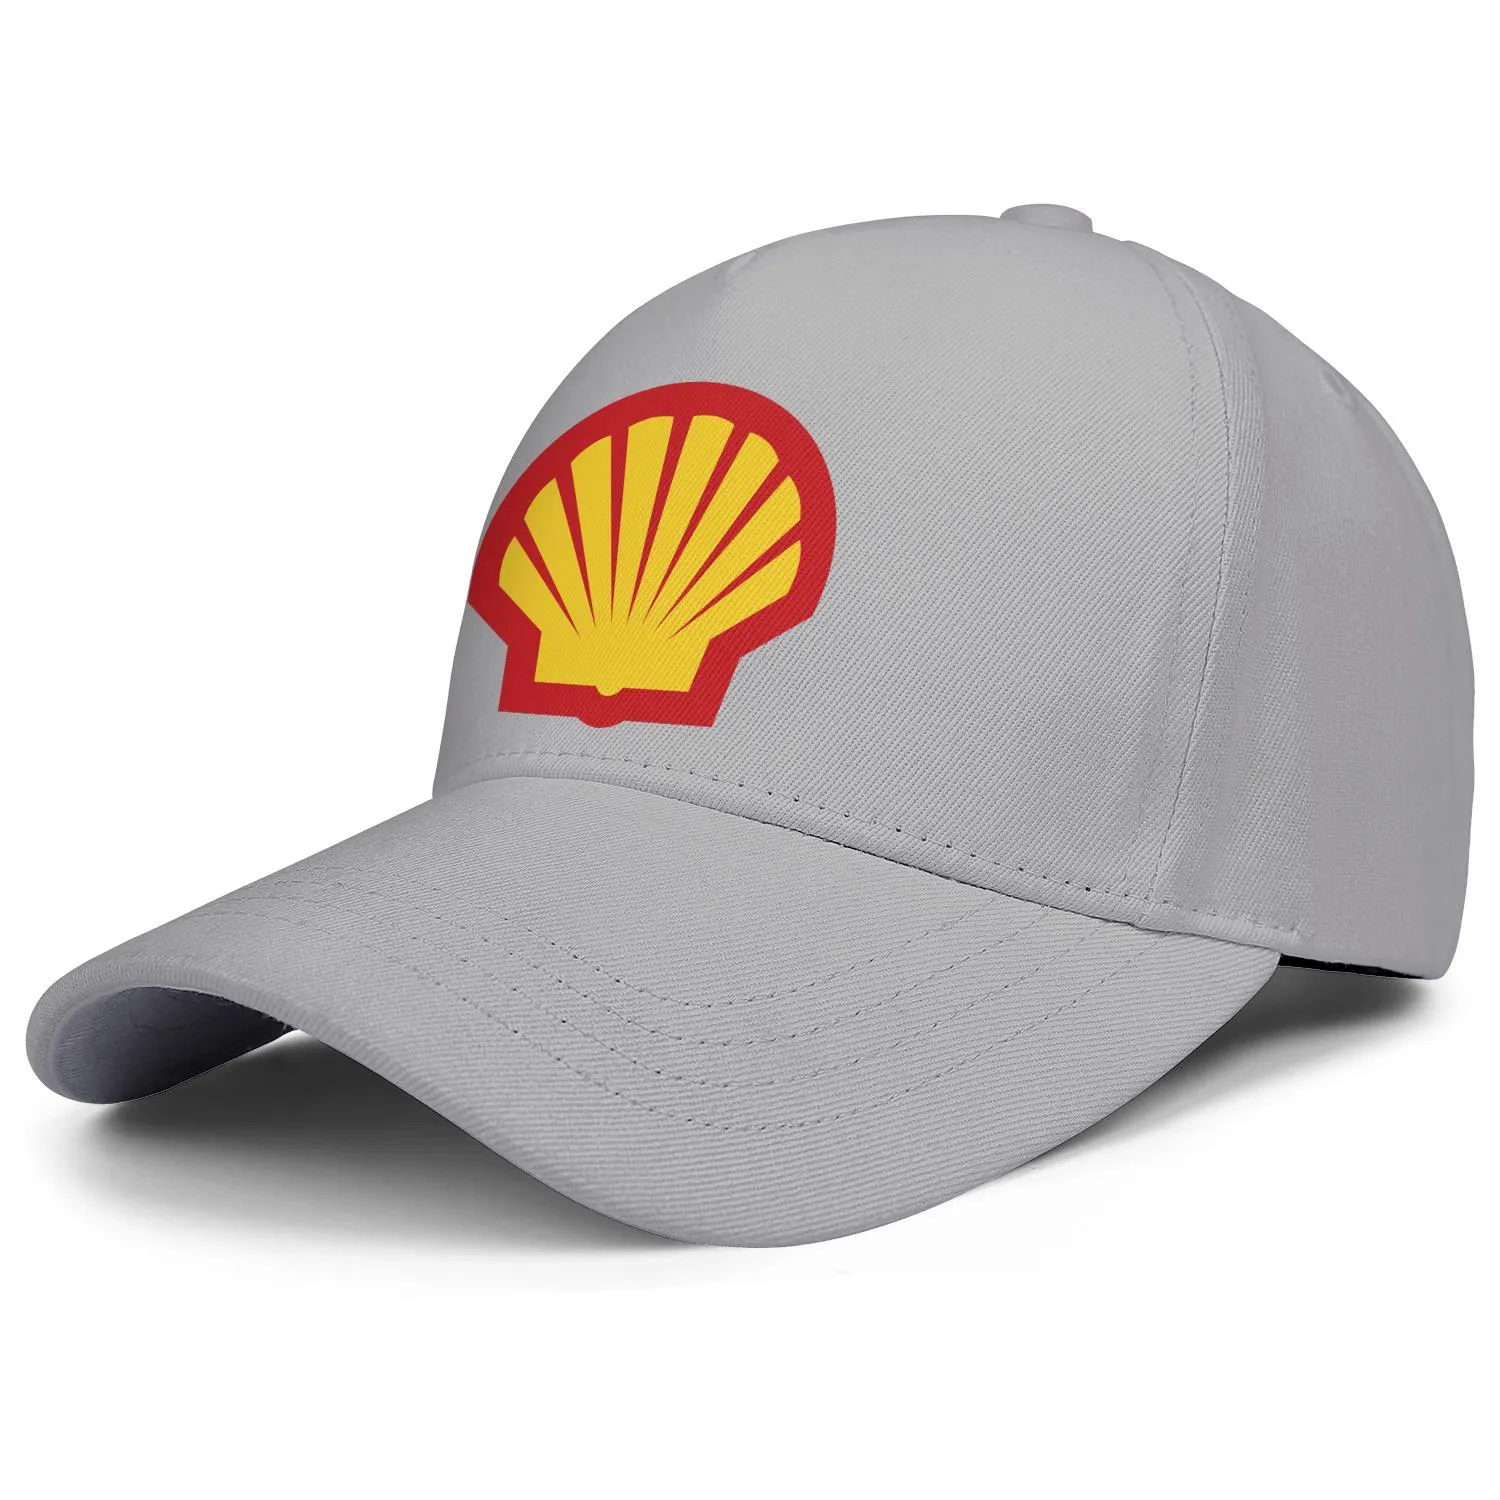 Shell gasoline gas station logo mens and women adjustable trucker cap fitted vintage cute baseballhats locator Gasoline symbo903217970687